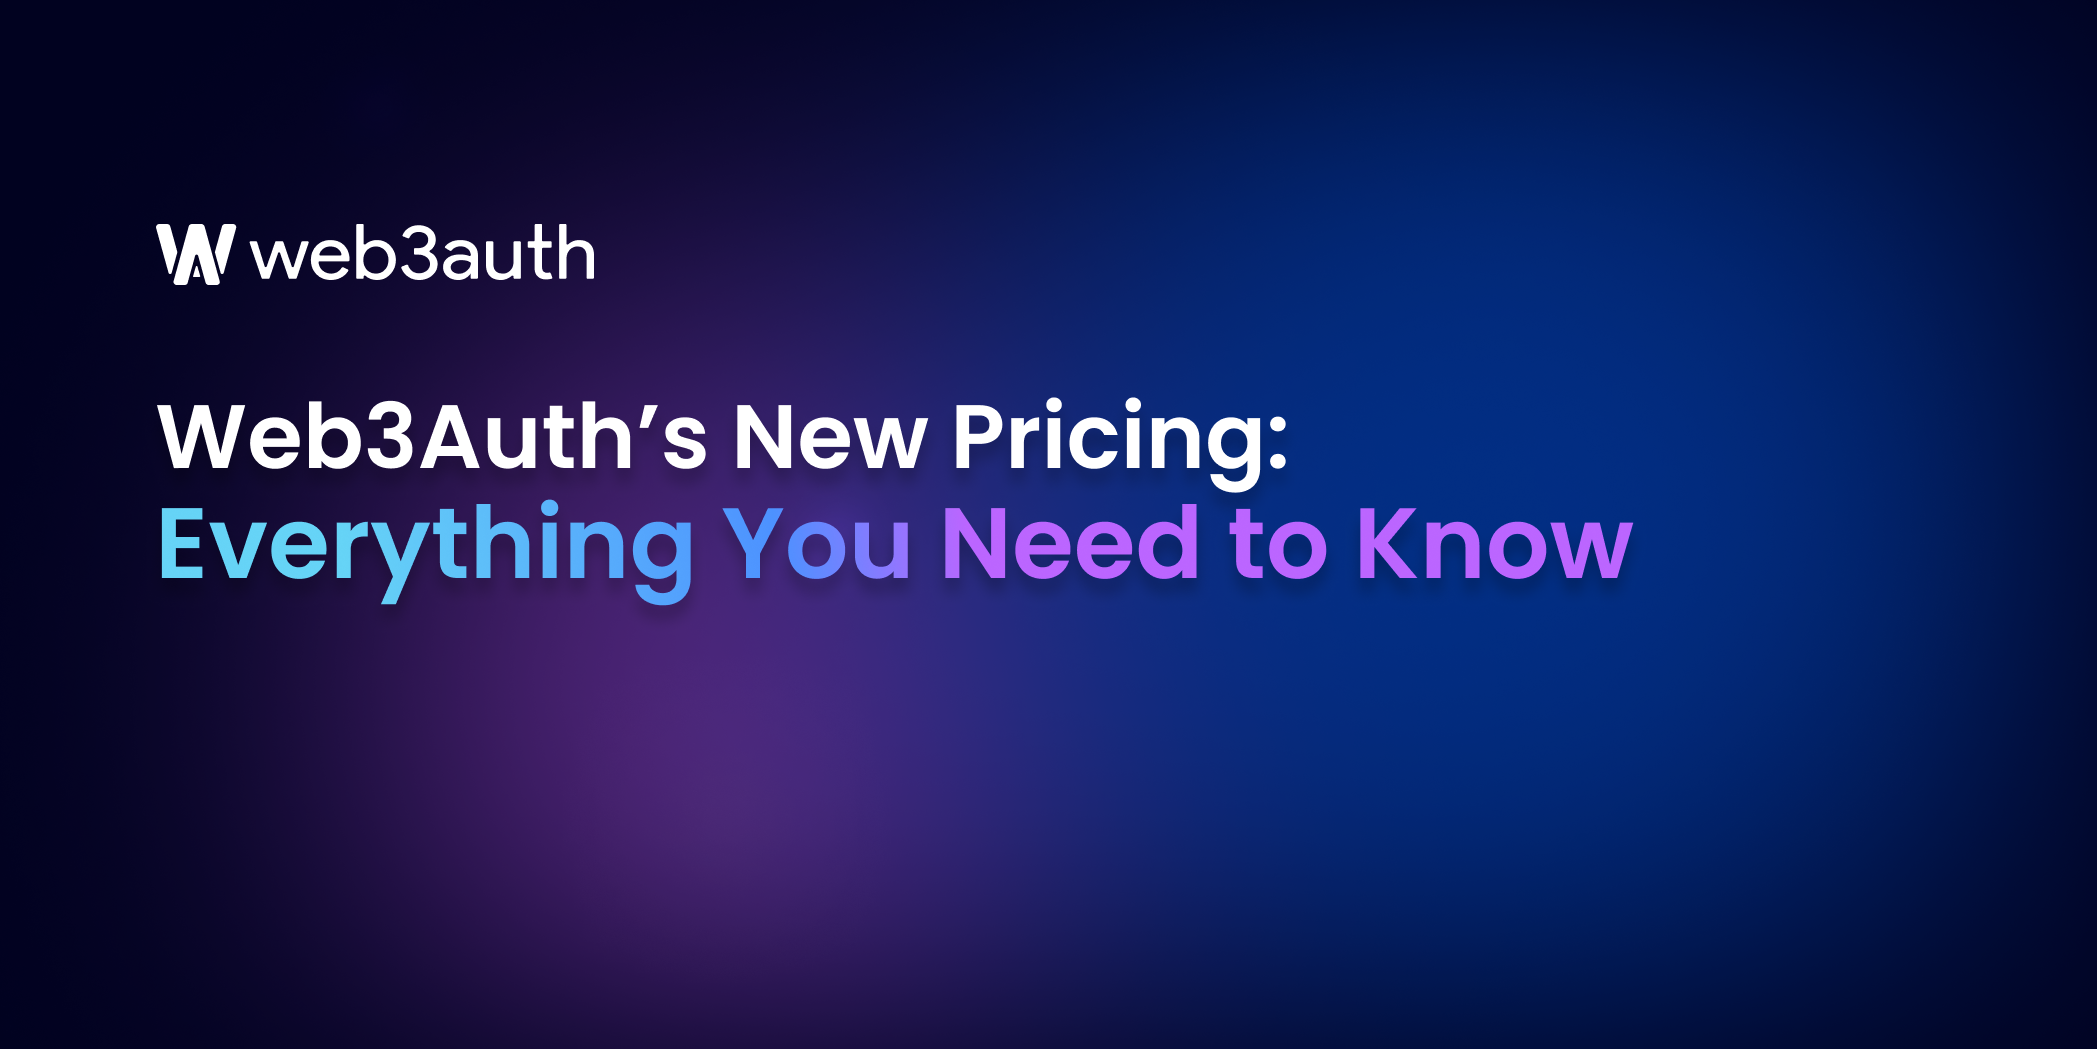 Web3Auth's New Pricing: Everything You Need to Know